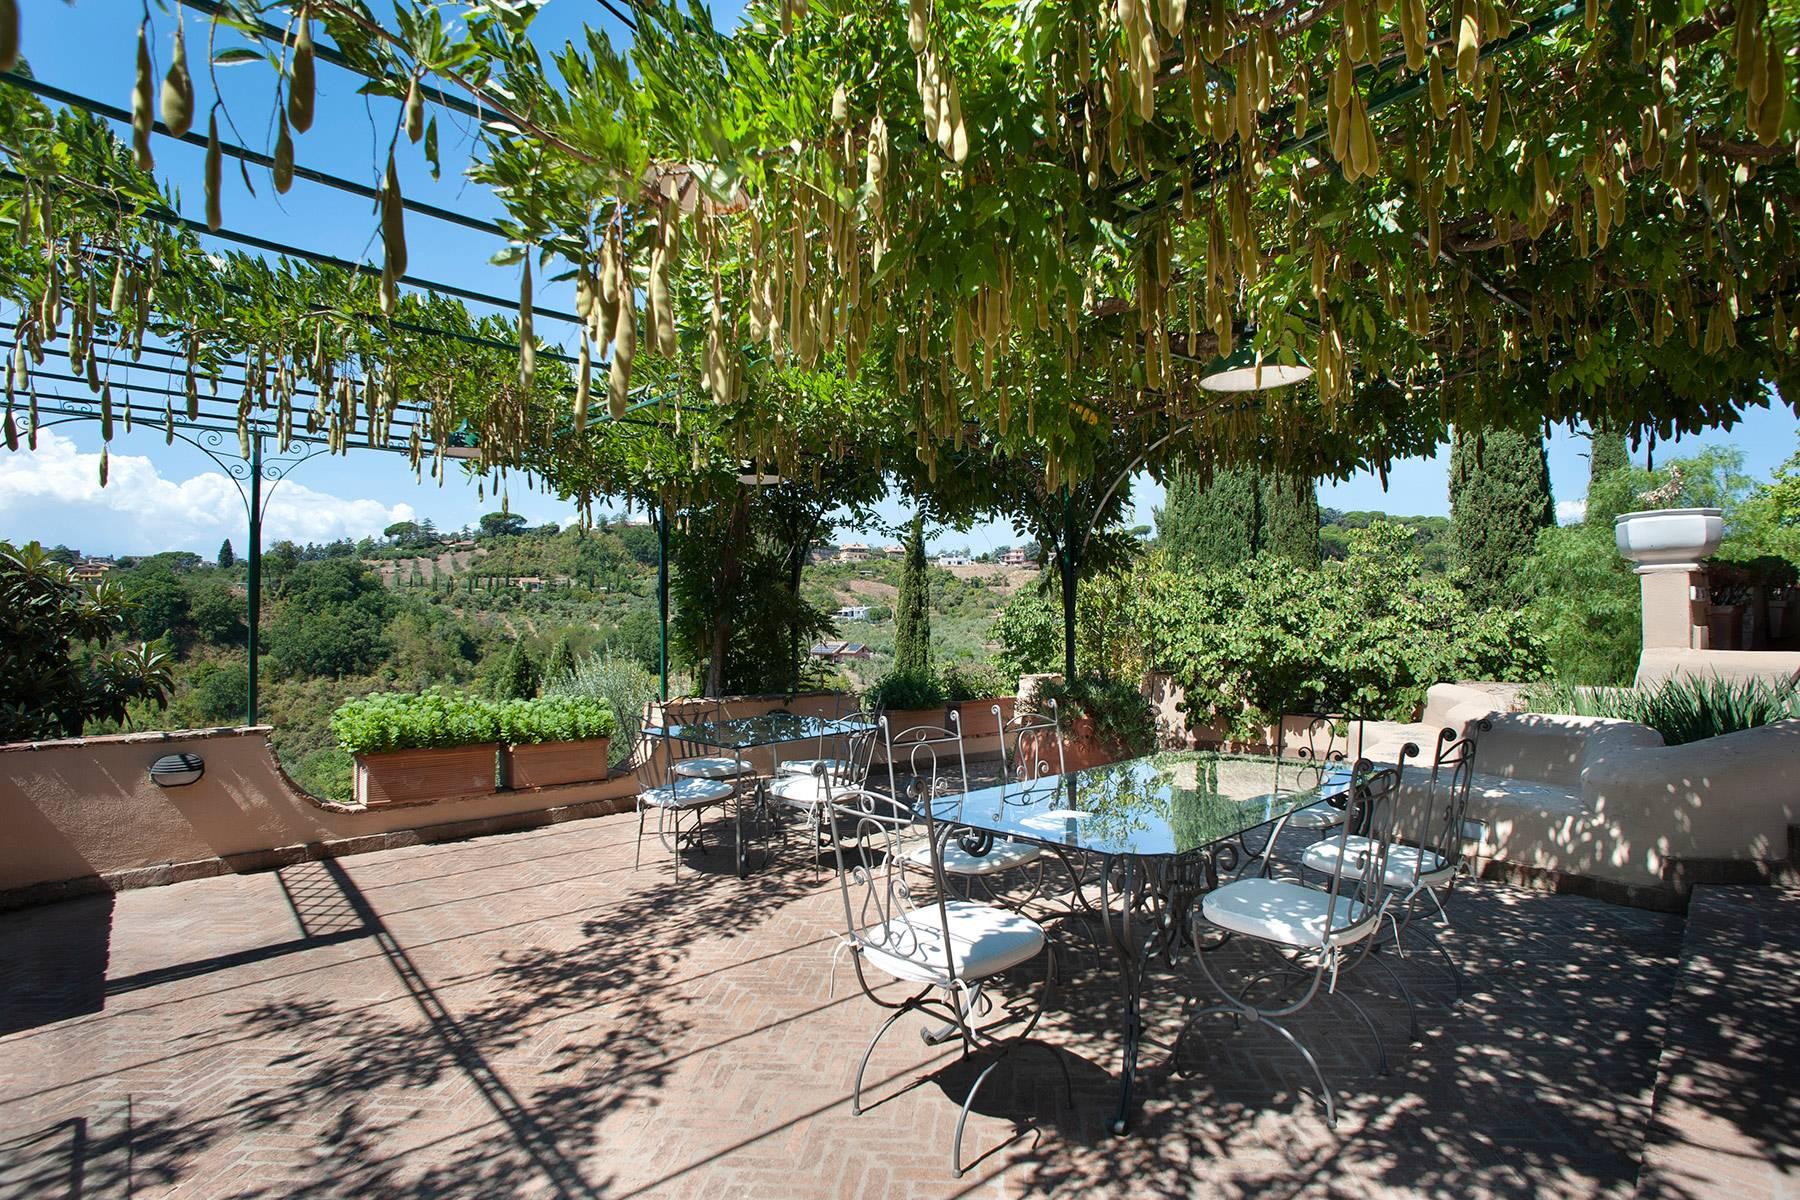 Villa Nayara - Lovely mansion with swimming pool 30 minutes from Rome - 52